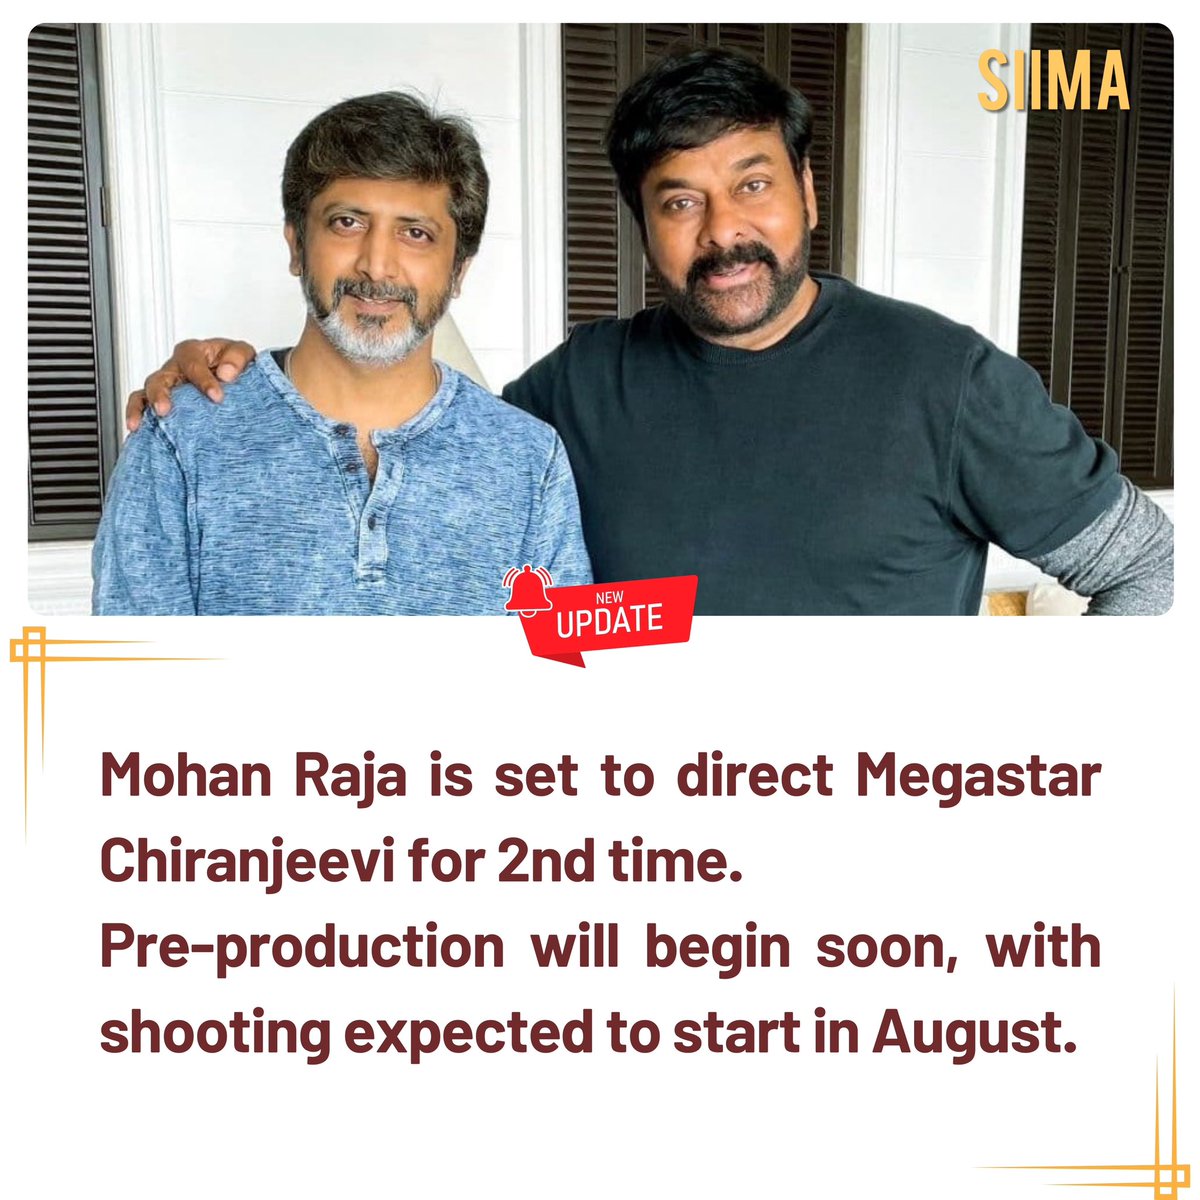 Mohan Raja teams up with Megastar Chiranjeevi once again! 🎬✨ Pre-production kicks off soon, with shooting slated to begin this August. Stay tuned for more updates! #Chiranjeevi #MohanRaja #FilmNews #SIIMA